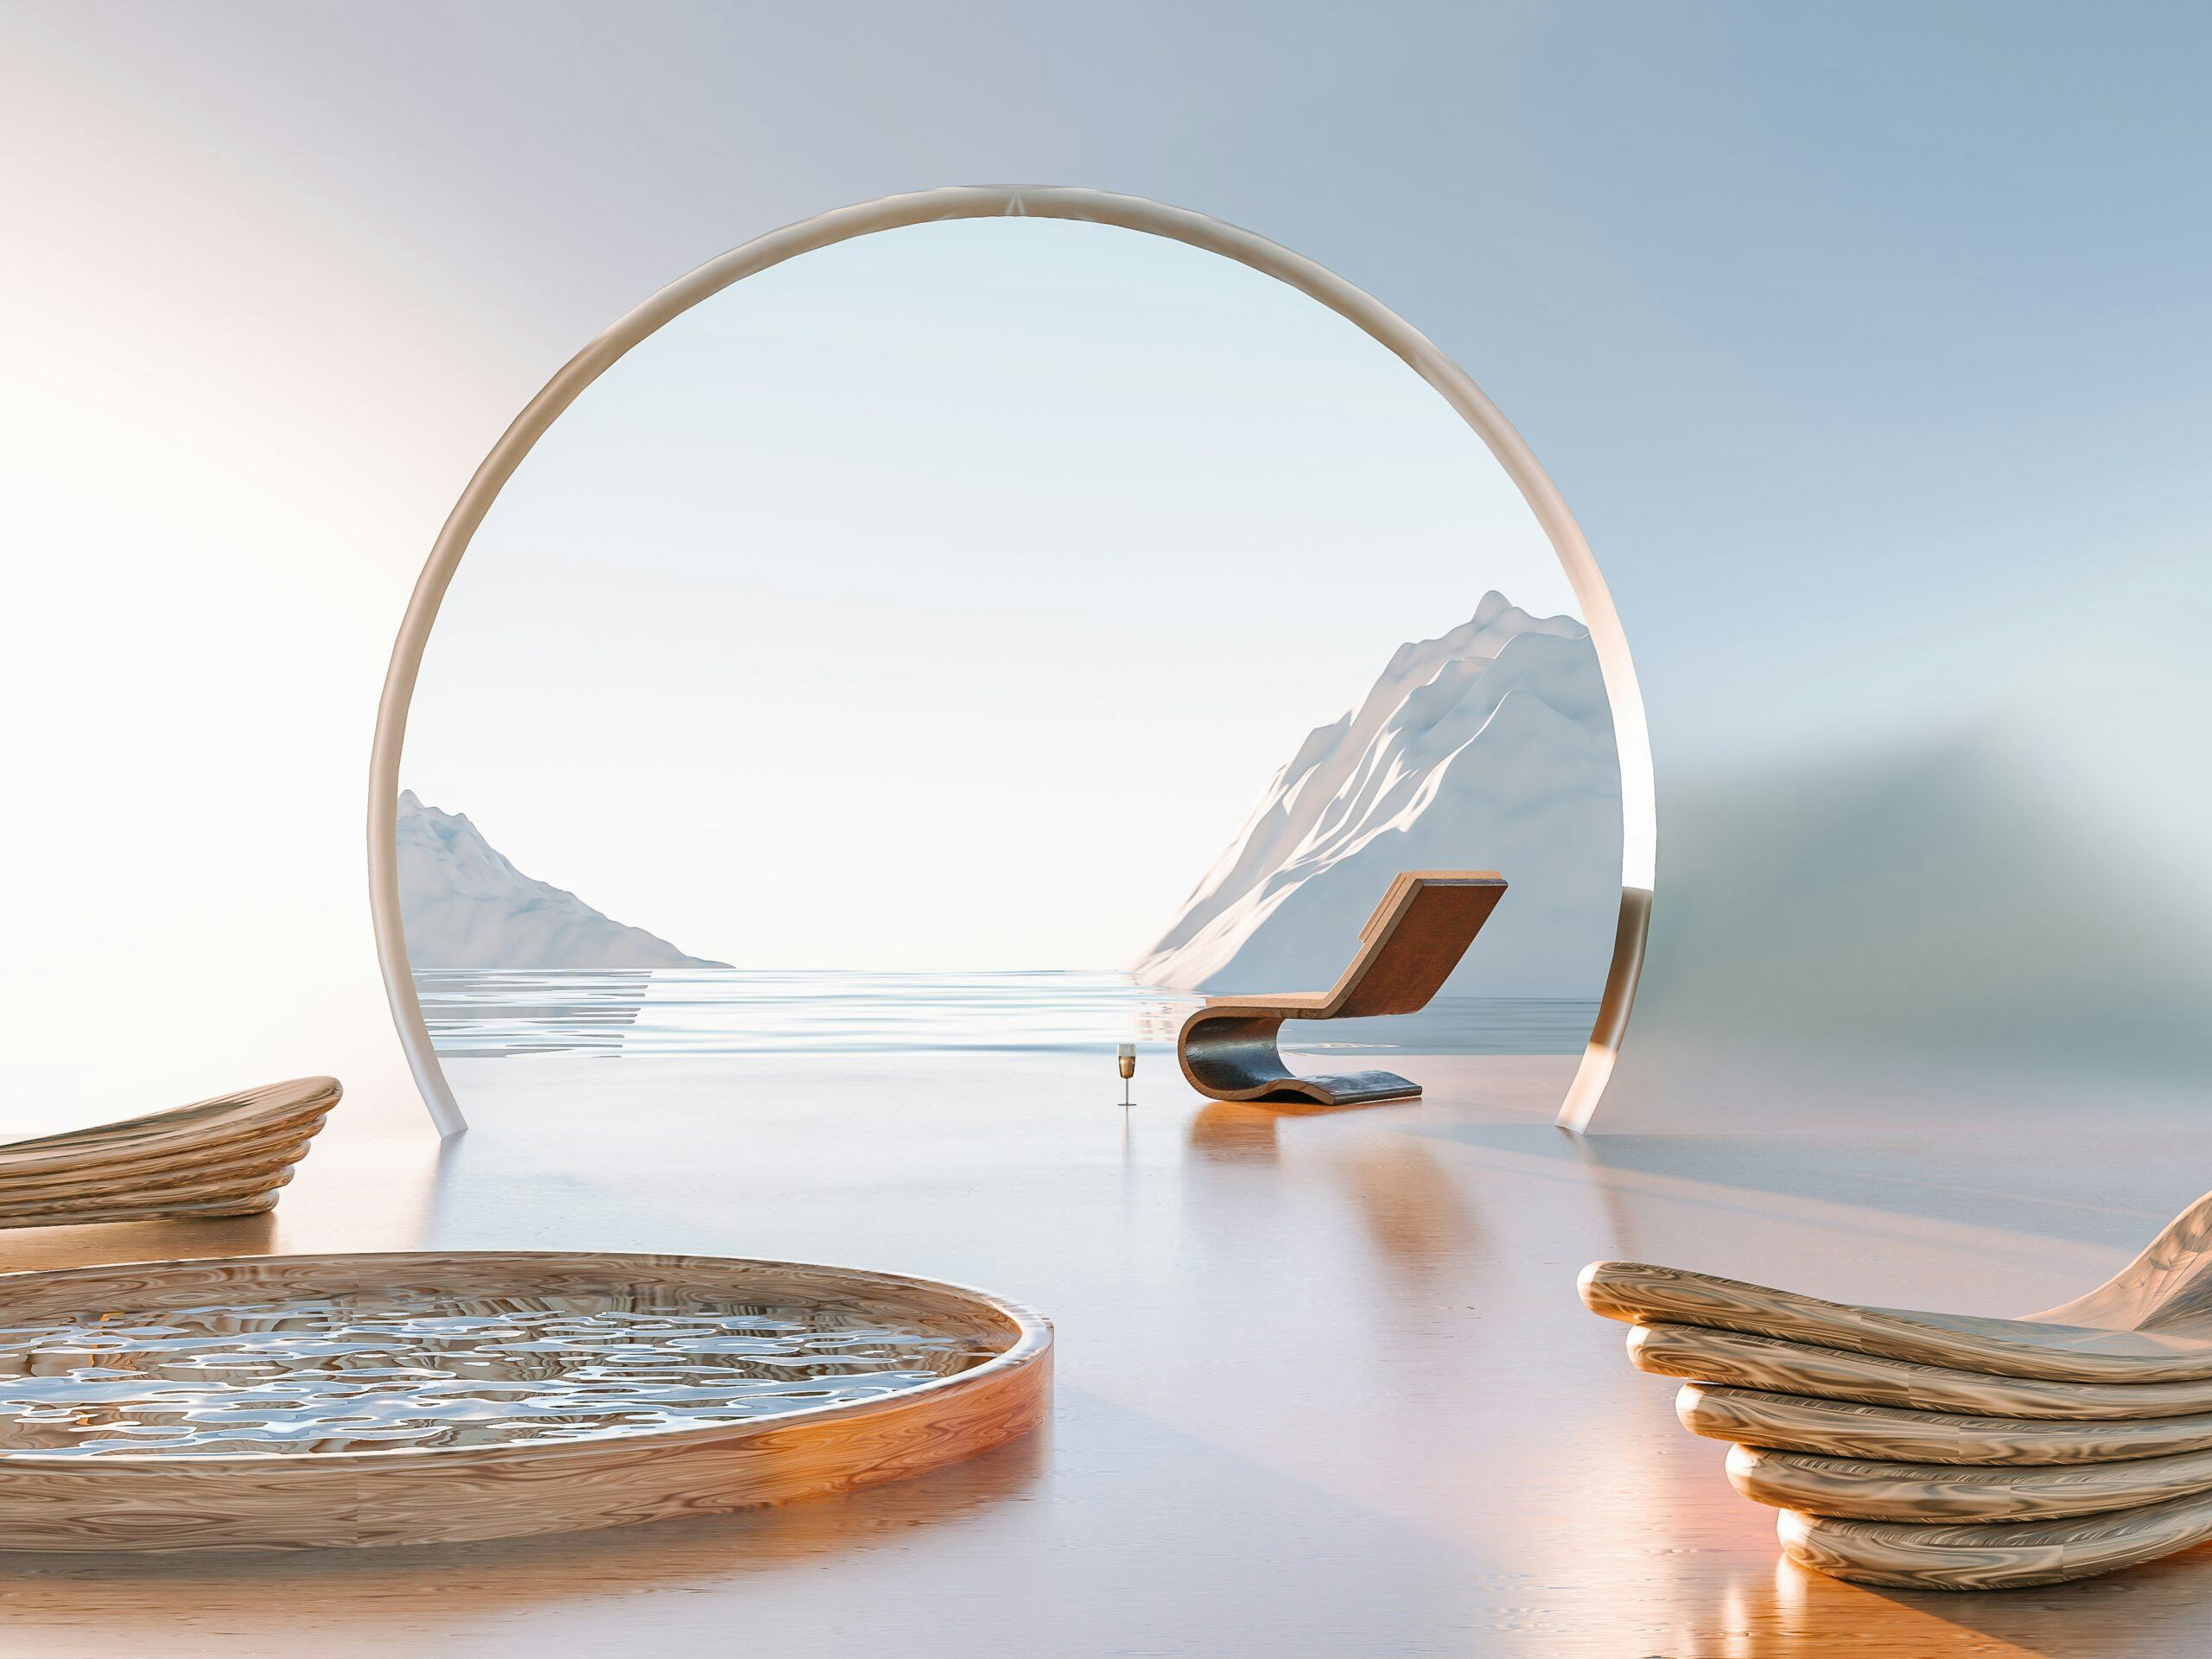 Restorative escape concept. Winter arctic surreal place with wooden lounge chairs and pool. Metaverse travelling to surreal places. Beeld Shutterstock